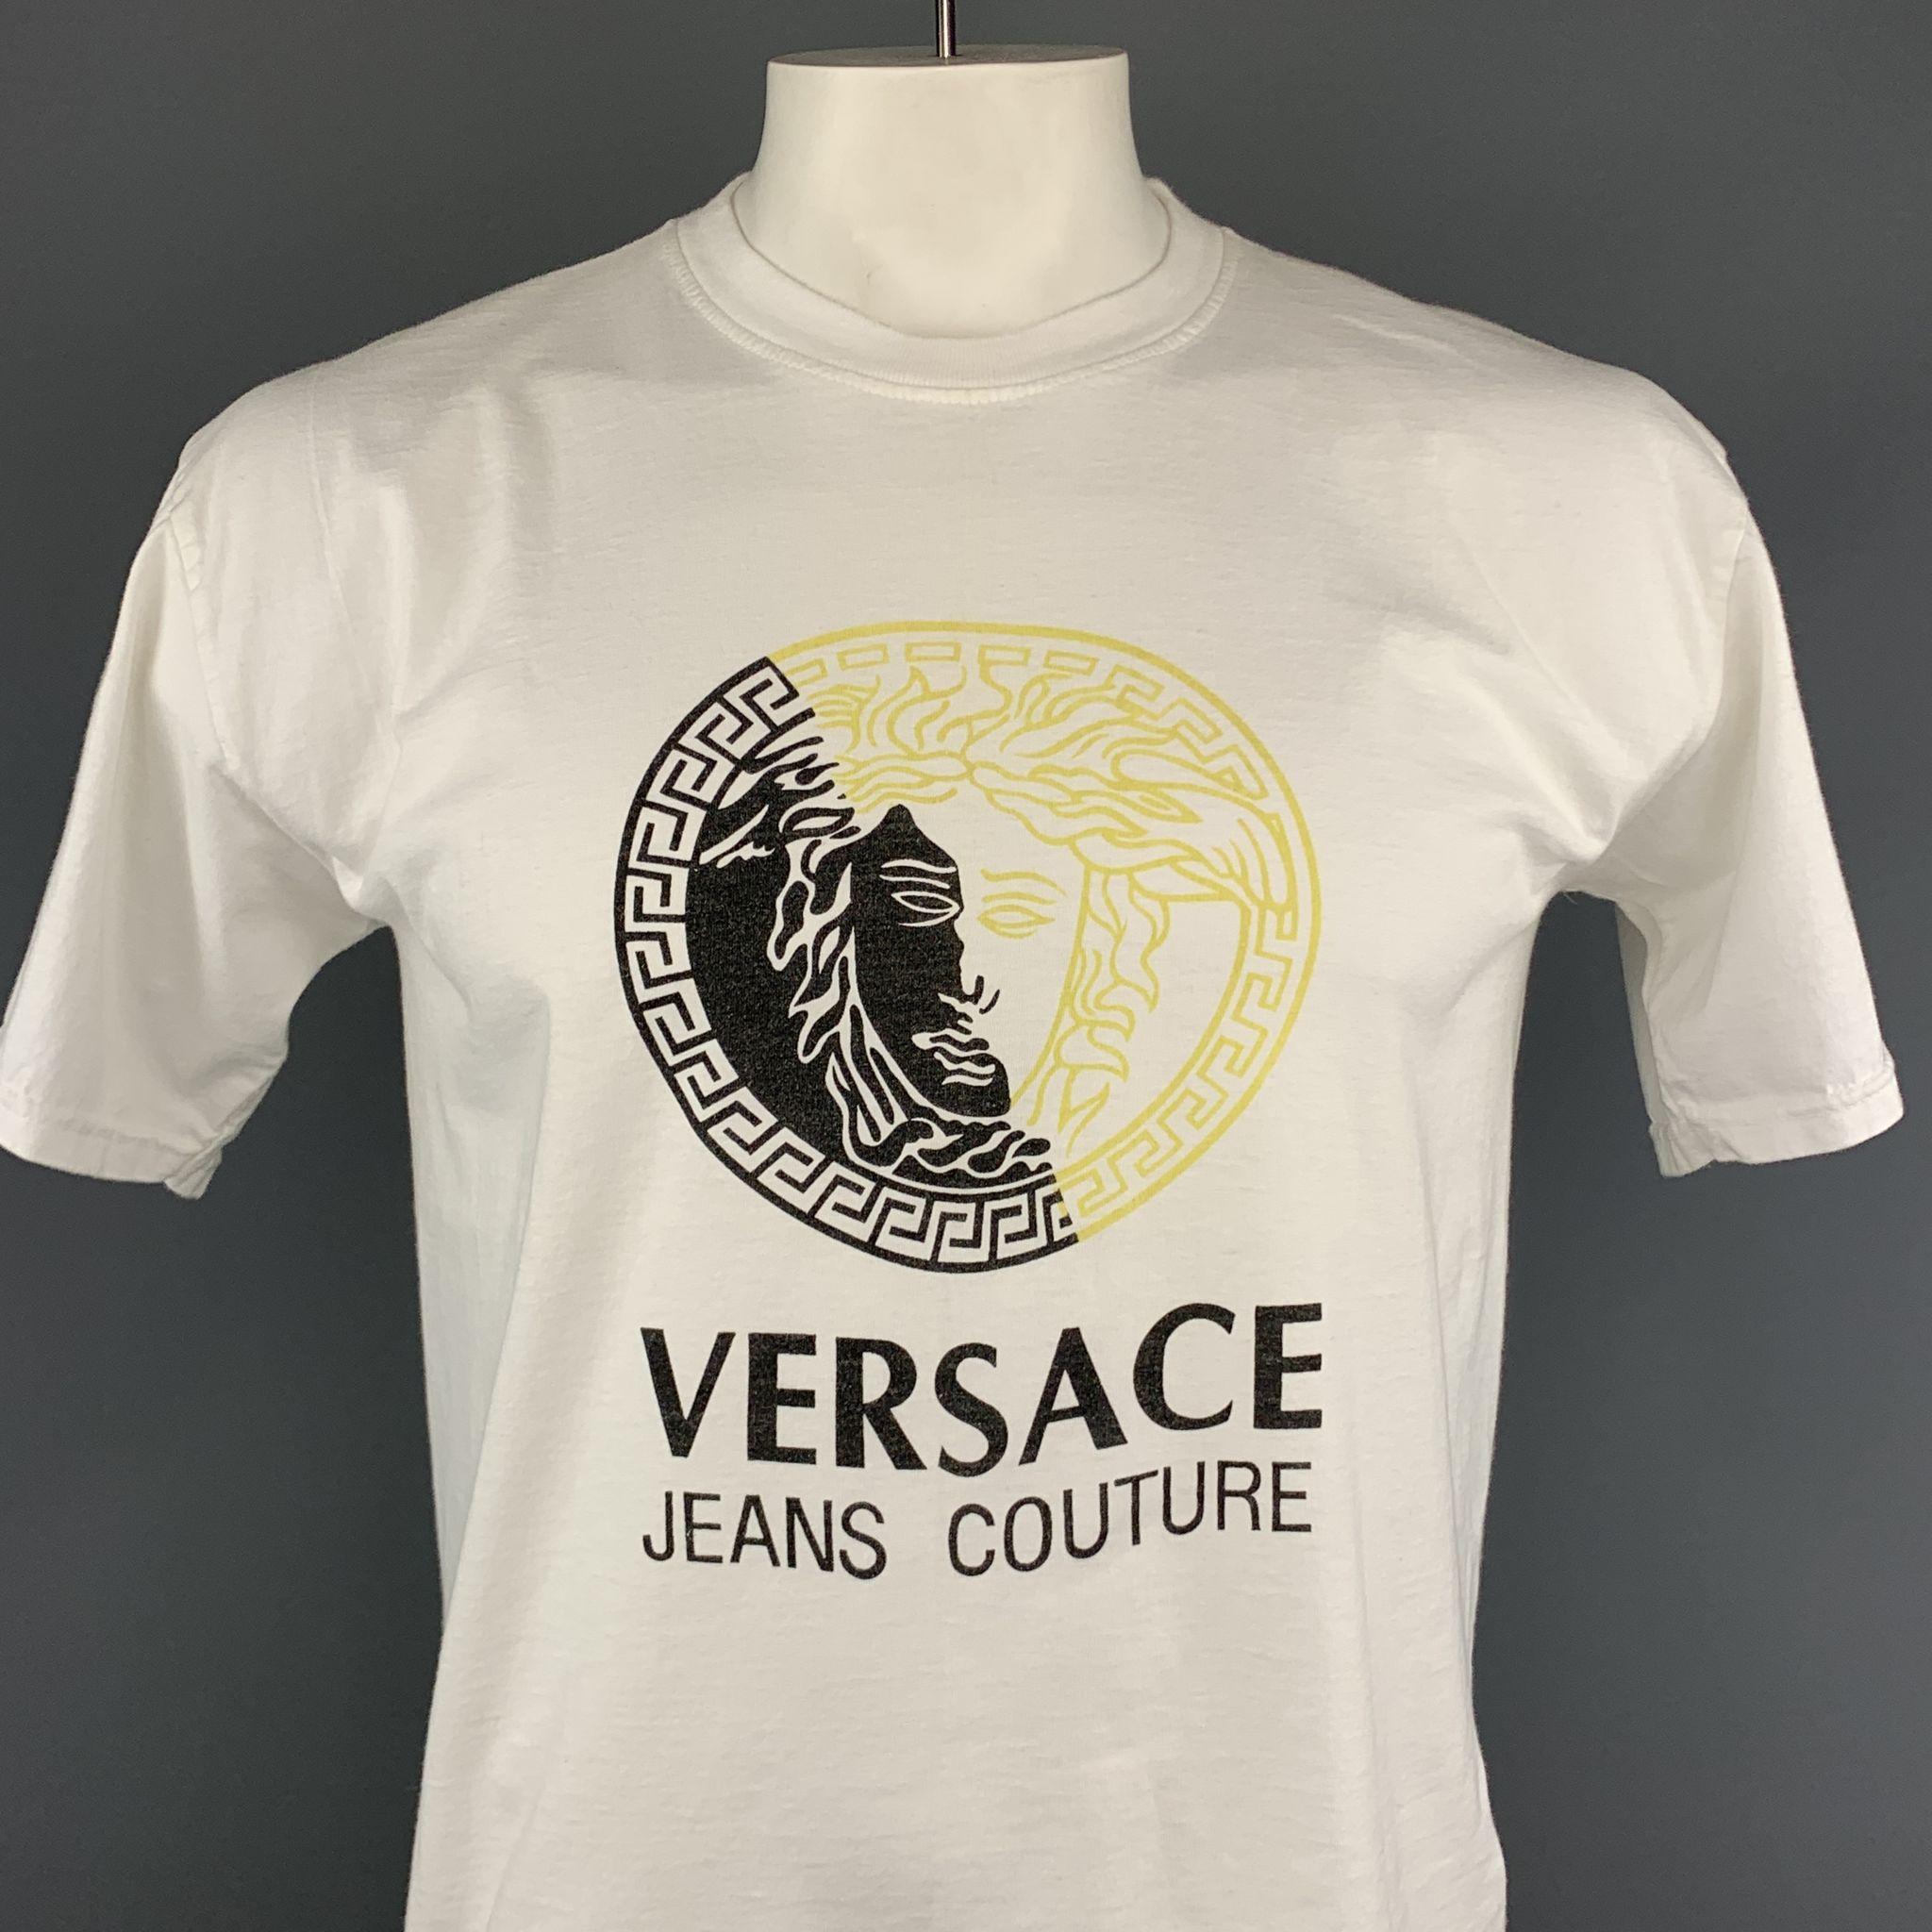 VERSACE JEANS COUTURE t-shirt comes in white cotton featuring it's original 